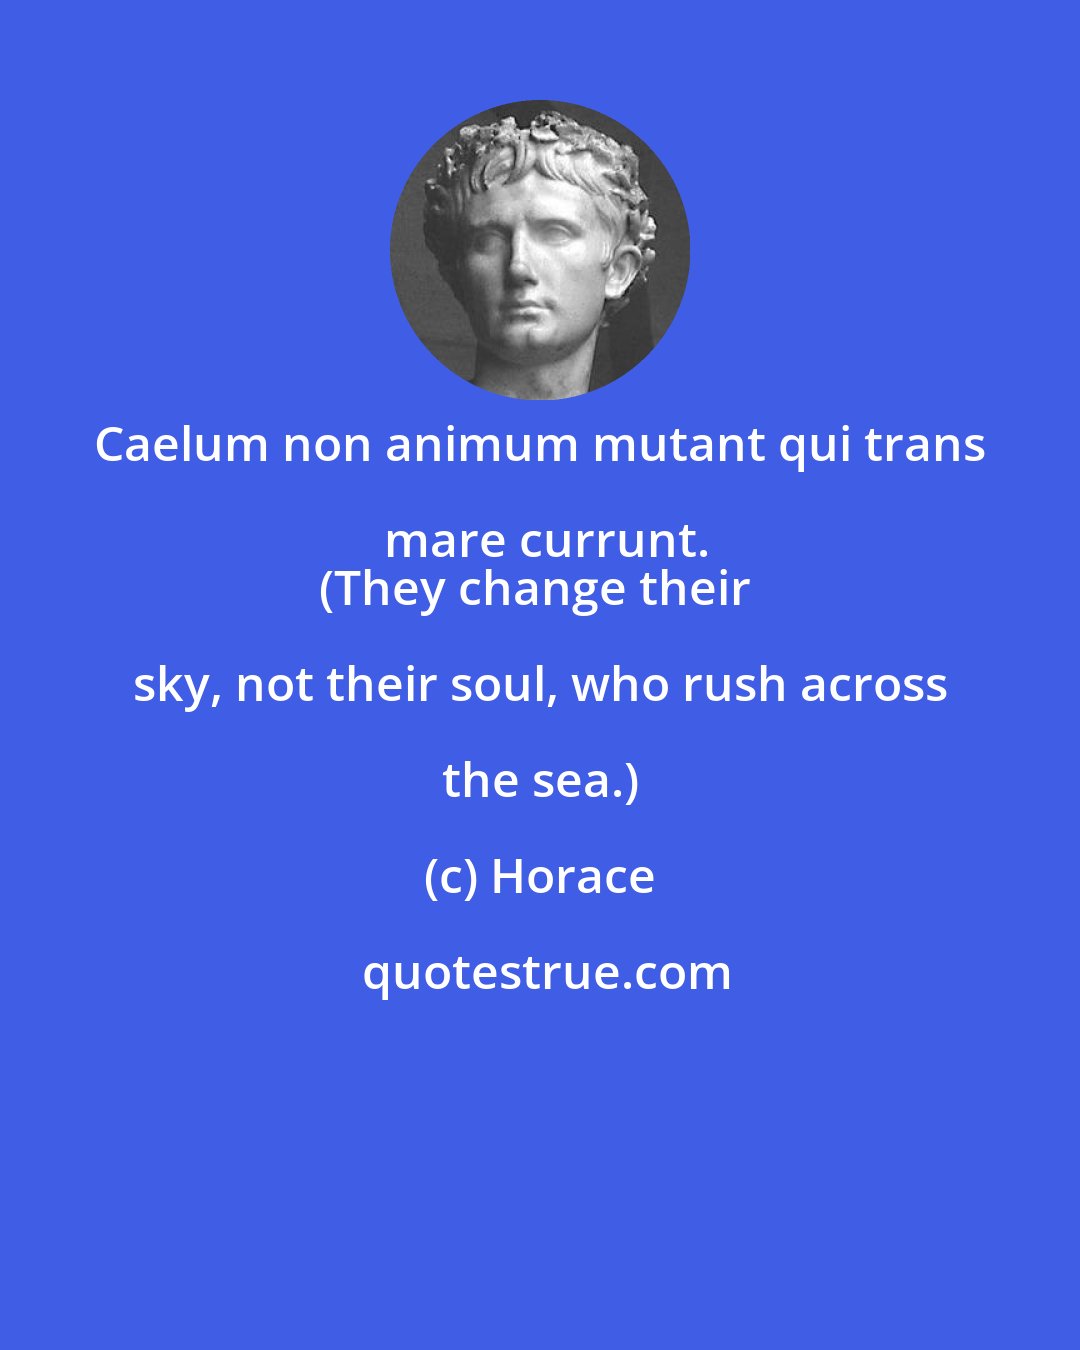 Horace: Caelum non animum mutant qui trans mare currunt.
(They change their sky, not their soul, who rush across the sea.)